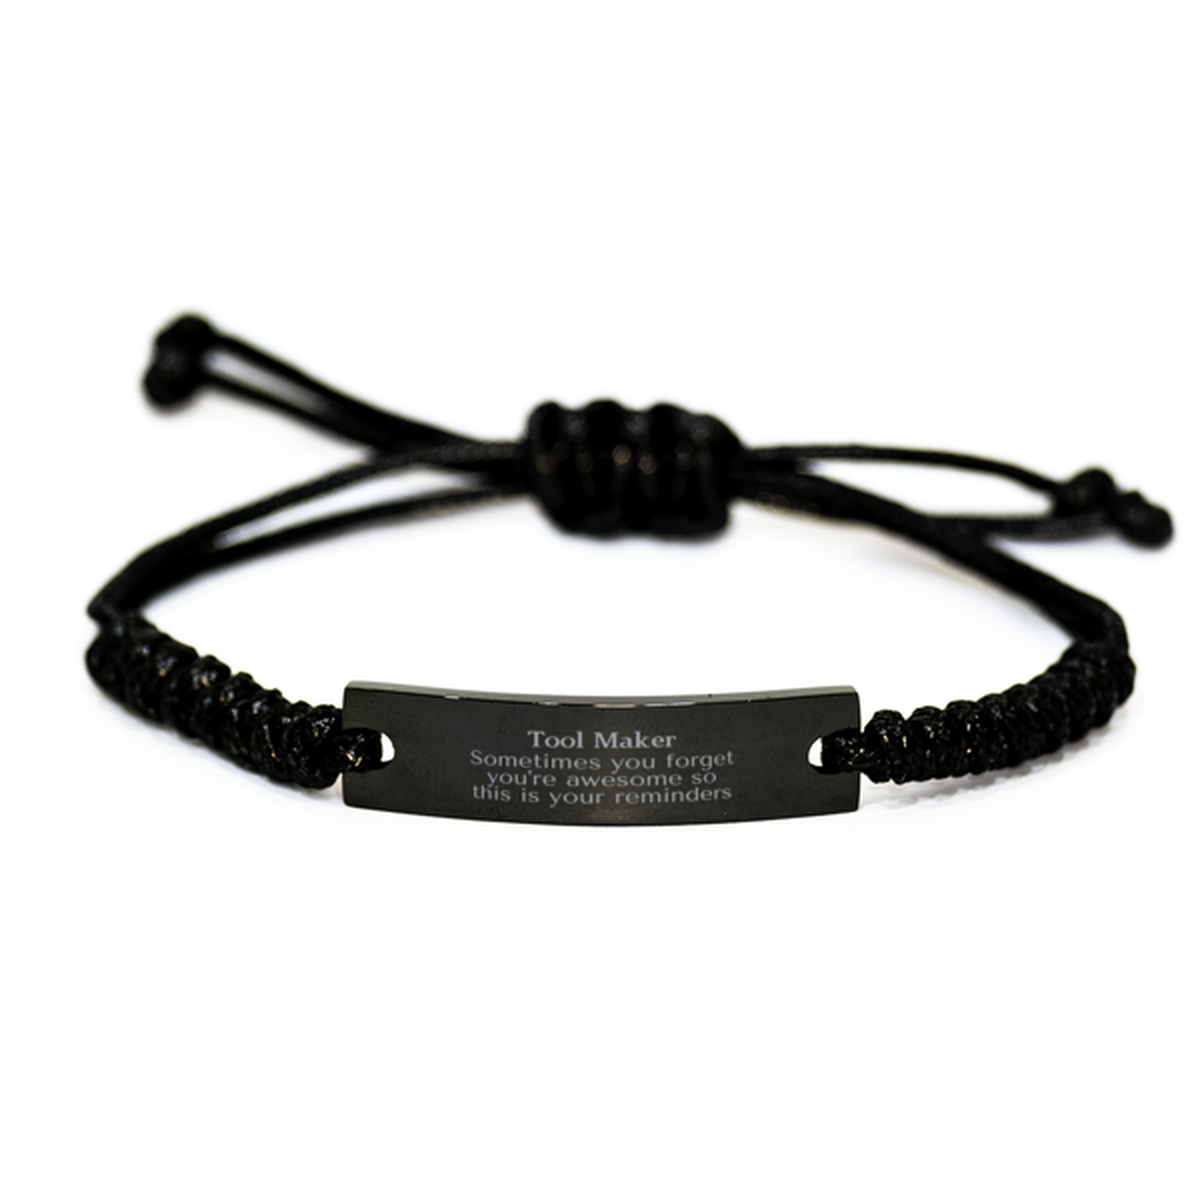 Sentimental Tool Maker Black Rope Bracelet, Tool Maker Sometimes you forget you're awesome so this is your reminders, Graduation Christmas Birthday Gifts for Tool Maker, Men, Women, Coworkers